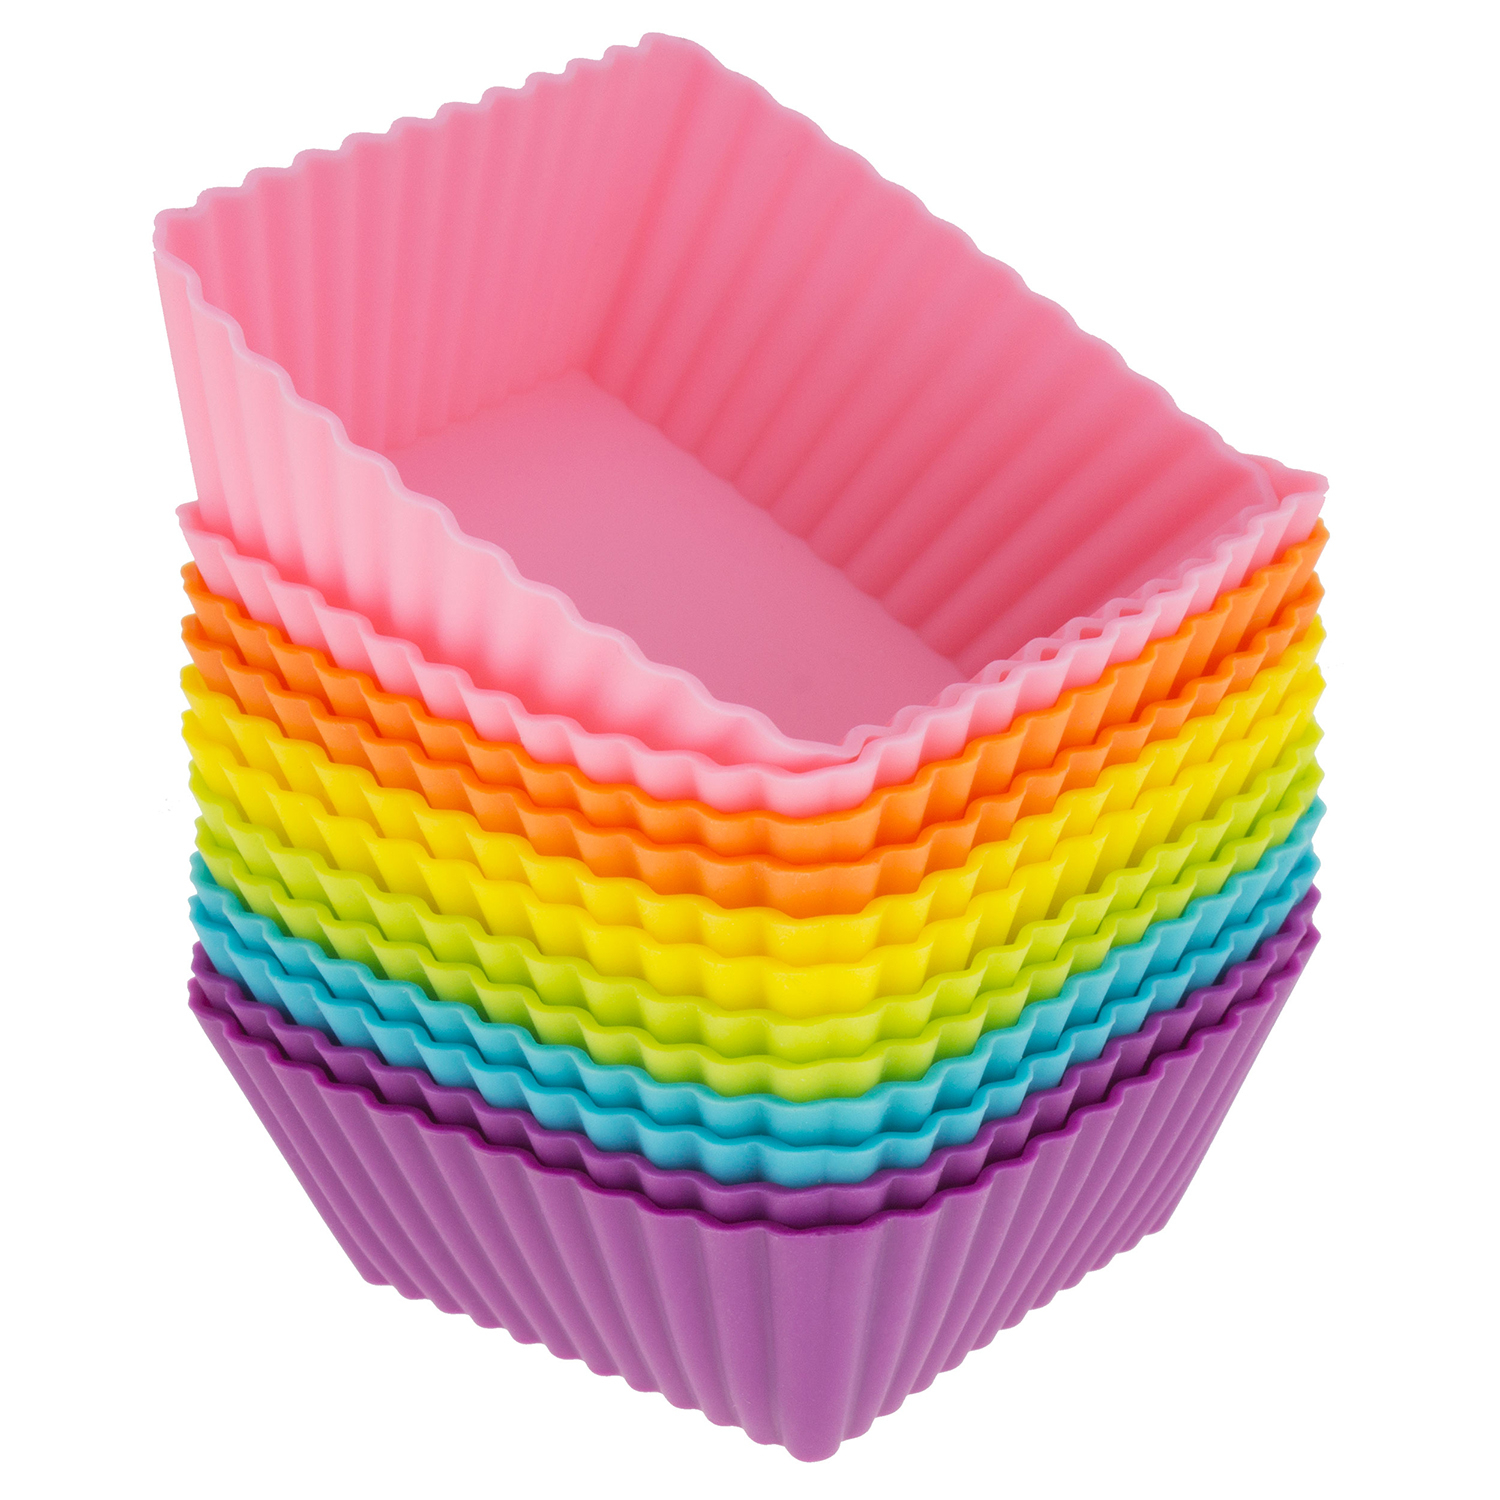 Freshware Silicone Cupcake Liners / Baking Cups - 12-Pack Muffin Molds, 2.5 inch Square, Six Vibrant Colors